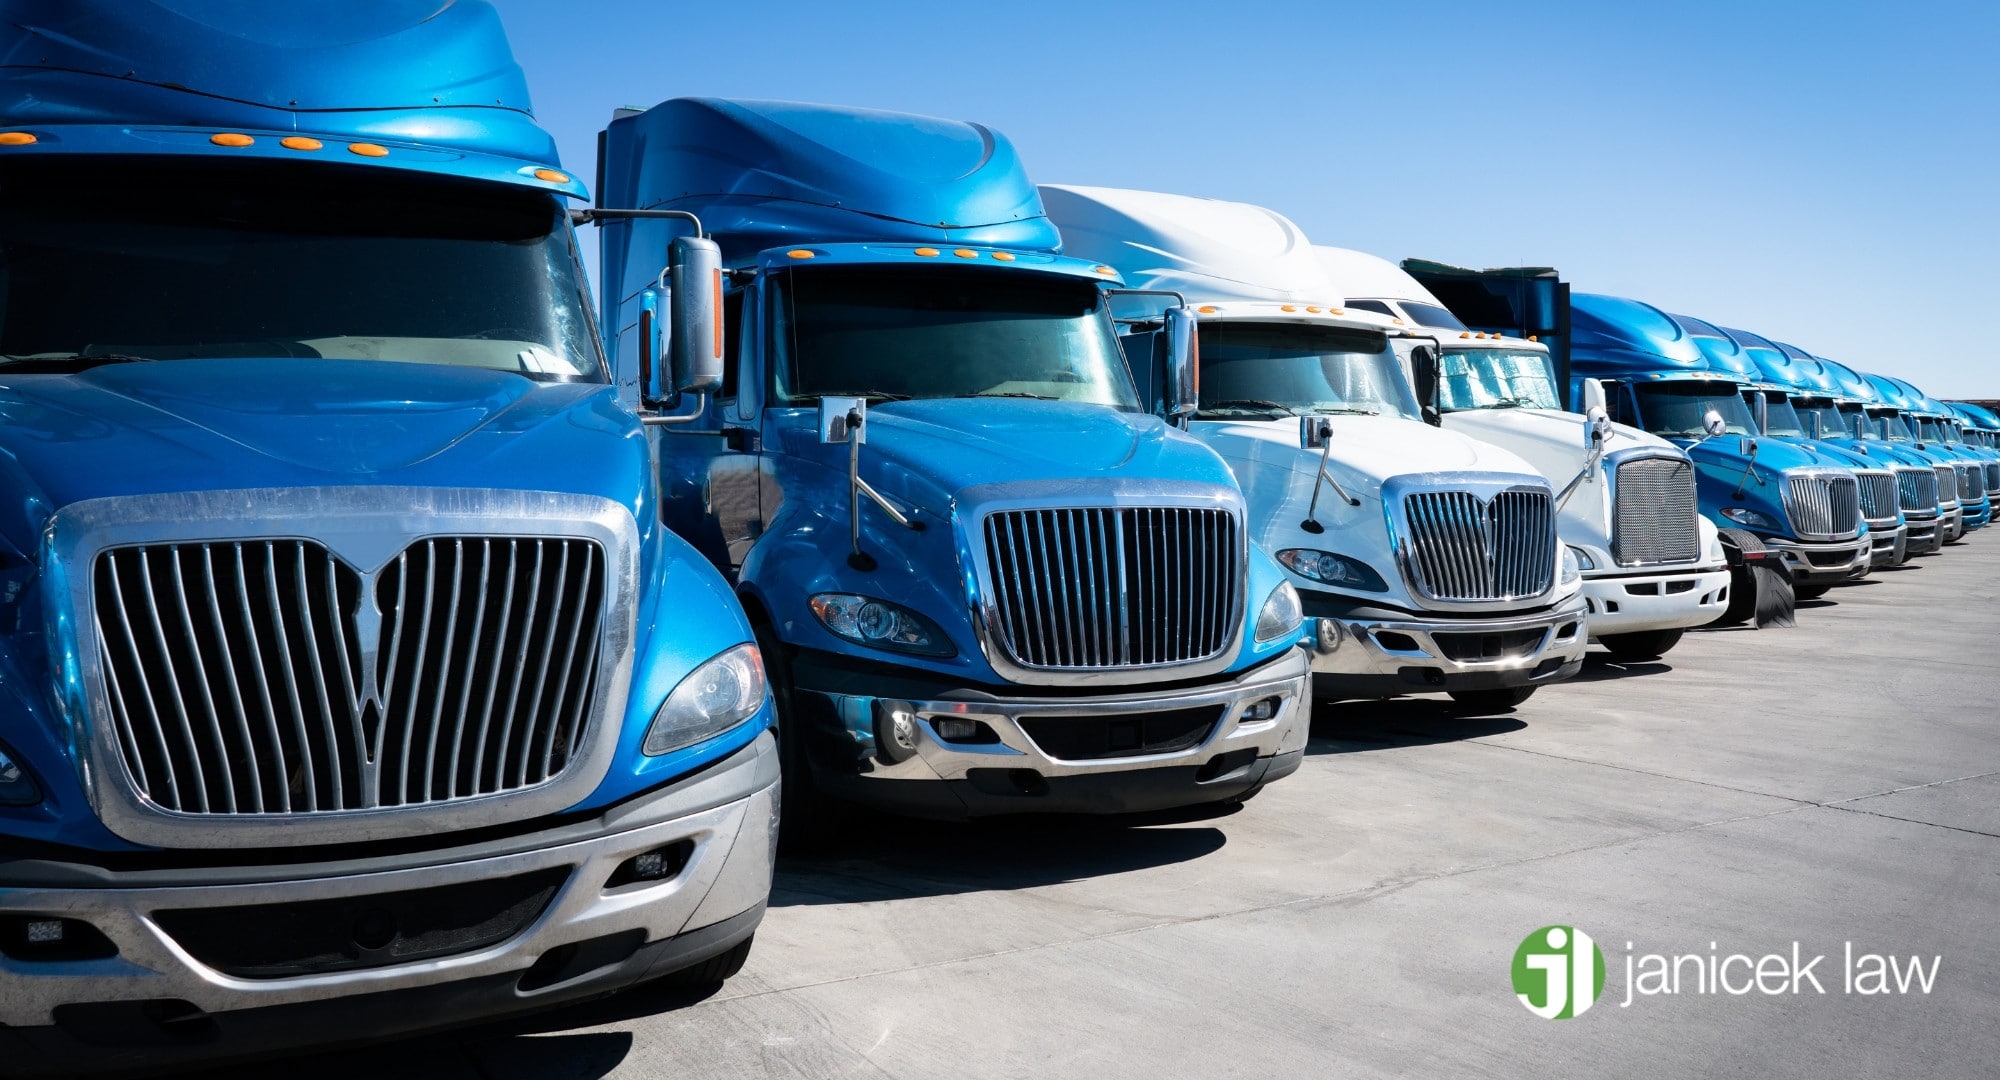 18 Wheeler Accident Lawyer San Antonio: Fighting for Your Rights